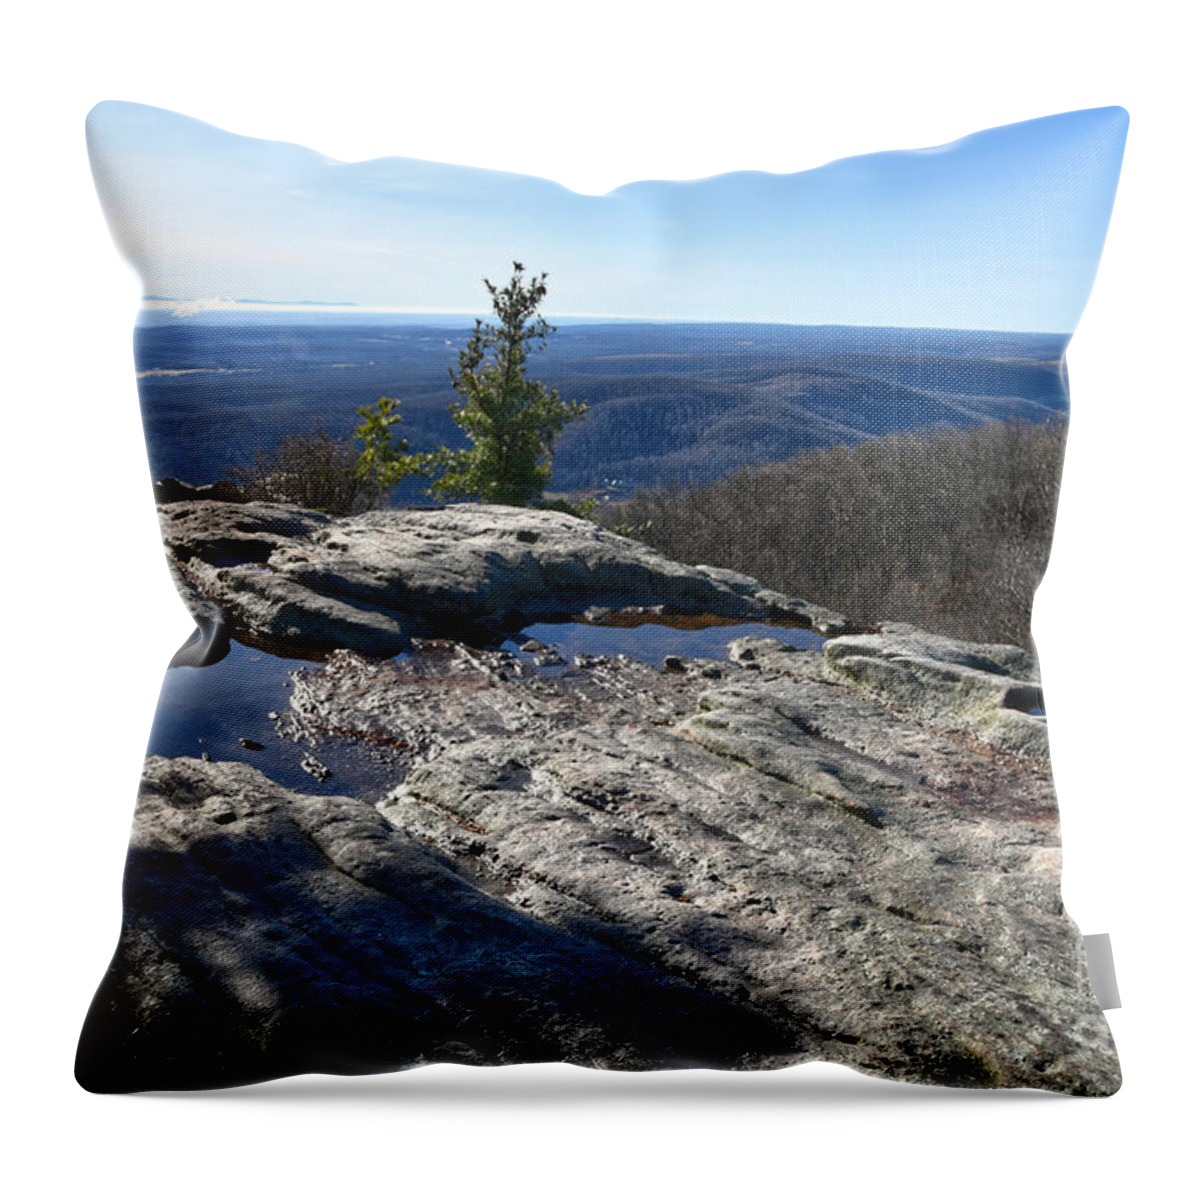 Black Mountain Throw Pillow featuring the photograph Black Mountain 1 by Phil Perkins